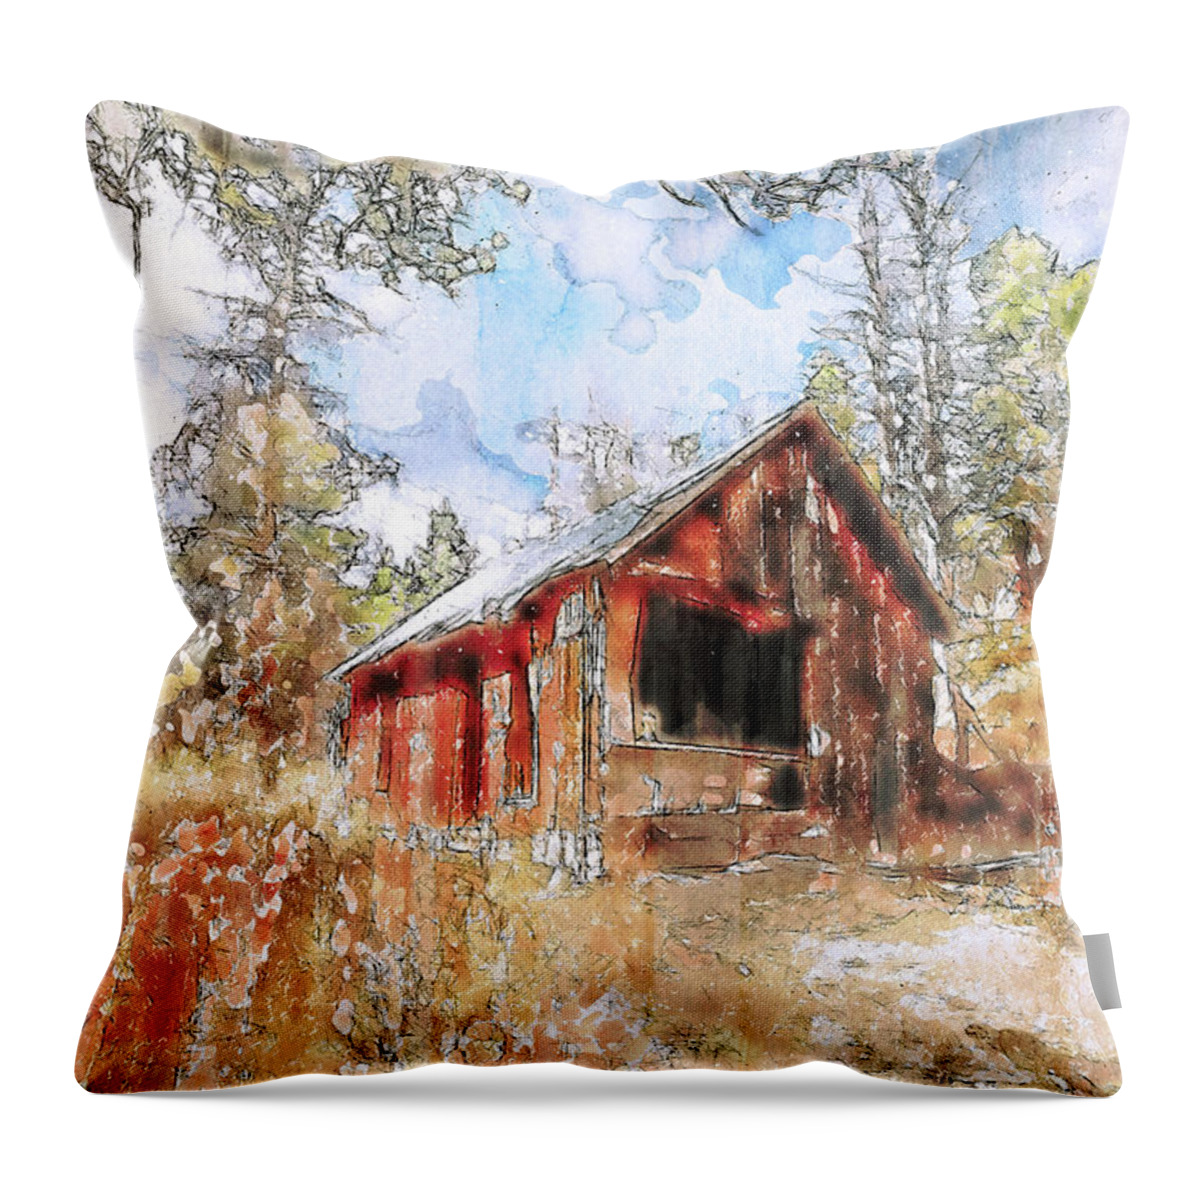 Cabin Throw Pillow featuring the photograph Forgotten Cabin by Jennifer Grossnickle